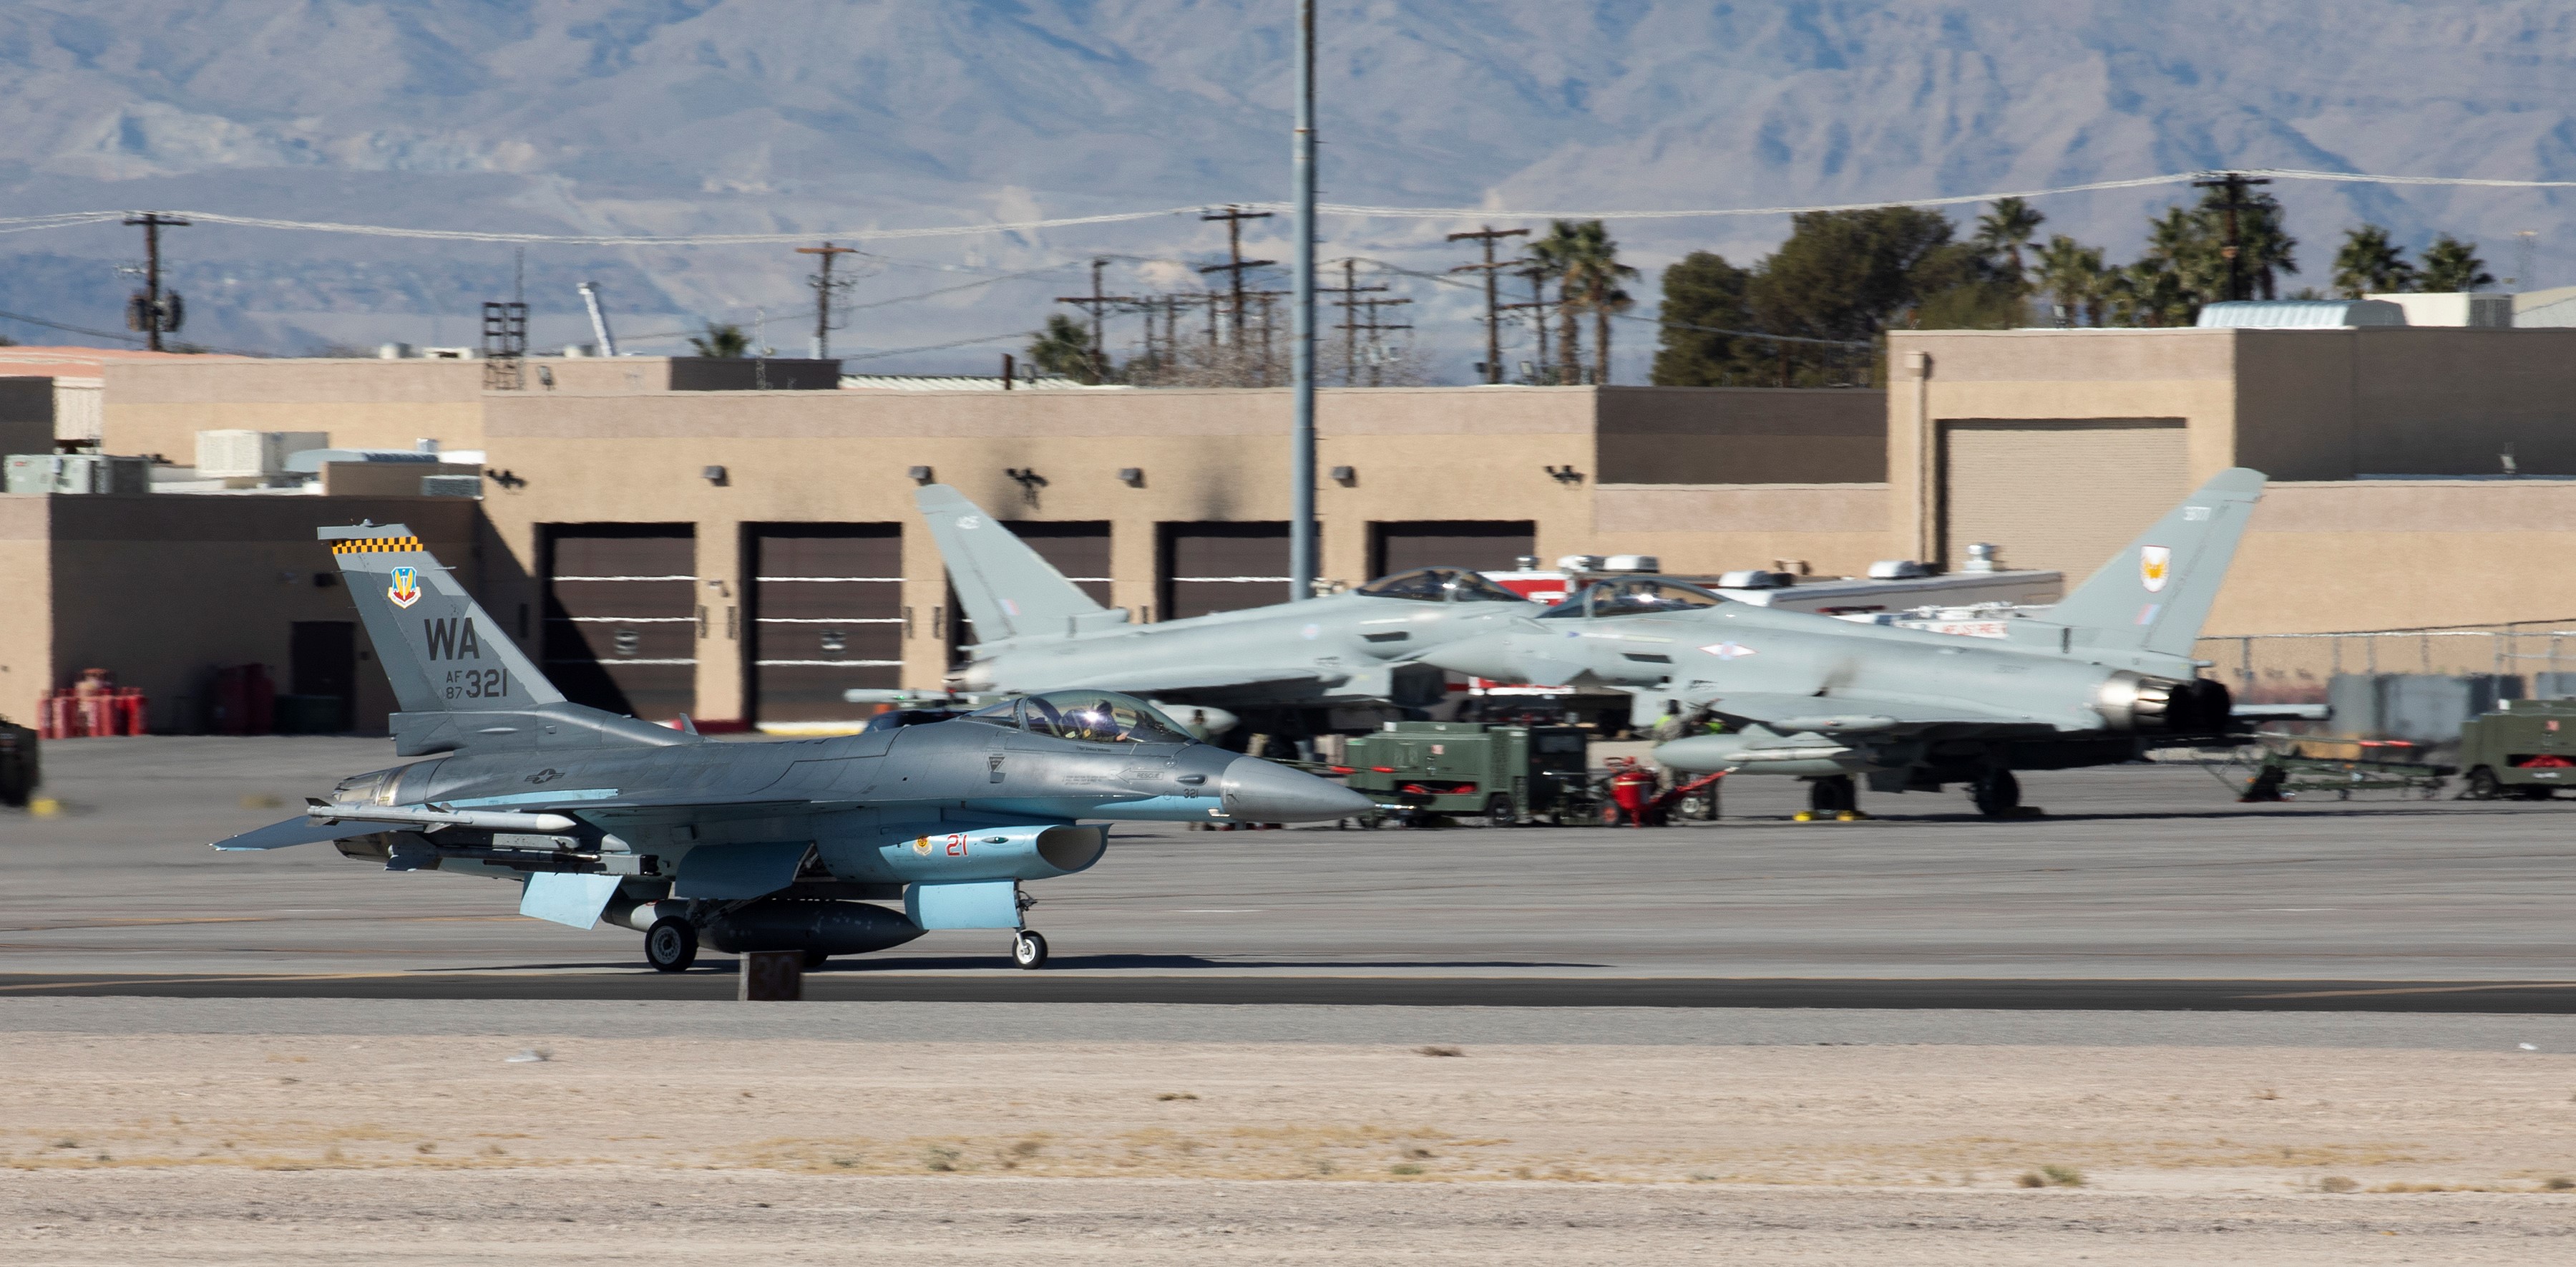 Image shows Typhoon and F-16 aircraft.